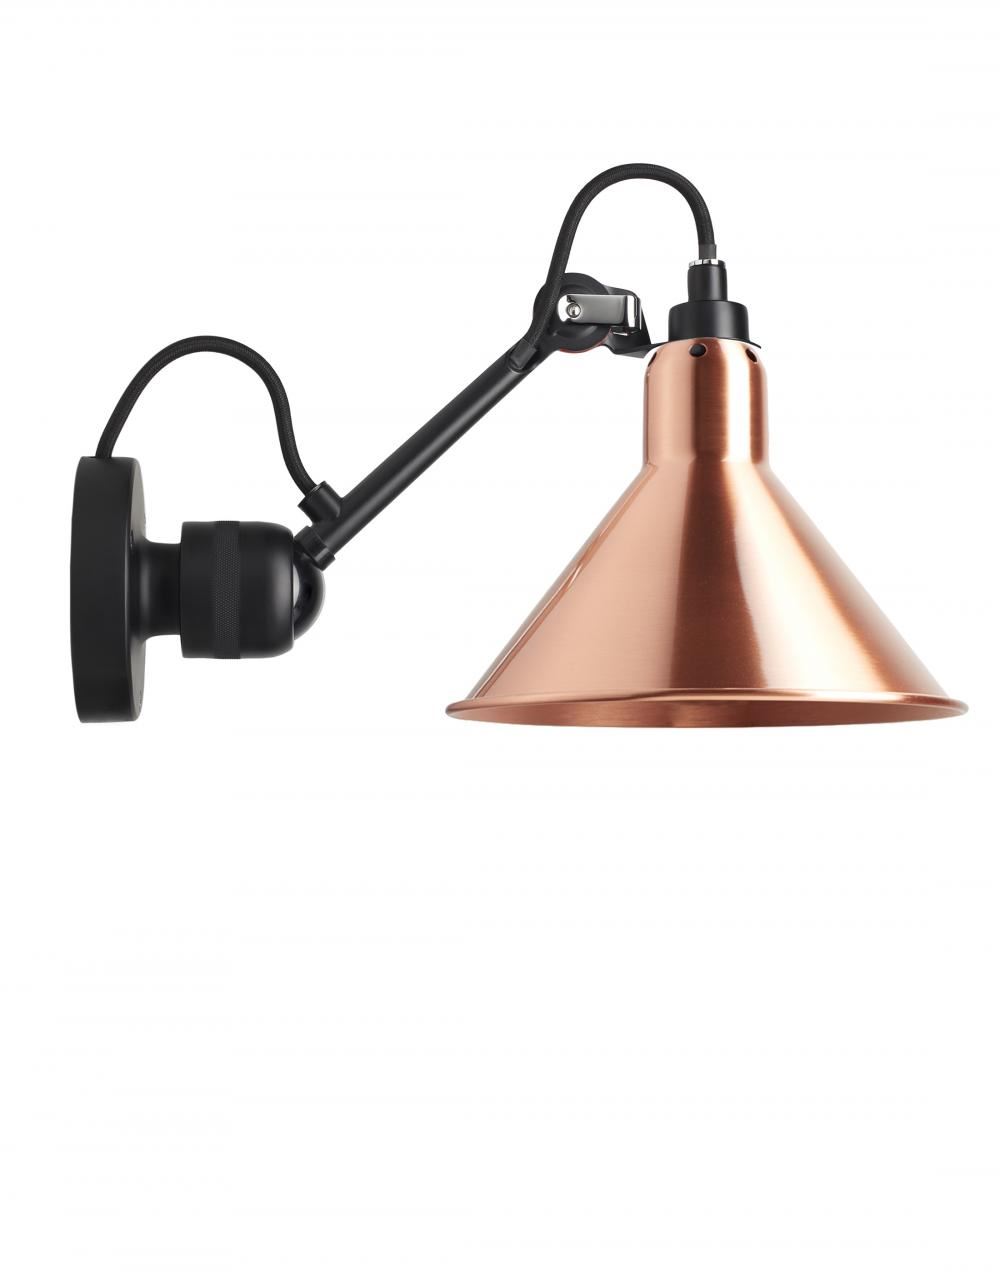 Lampe Gras 304 Small Wall Light Black Arm Copper Shade Conic Hardwired